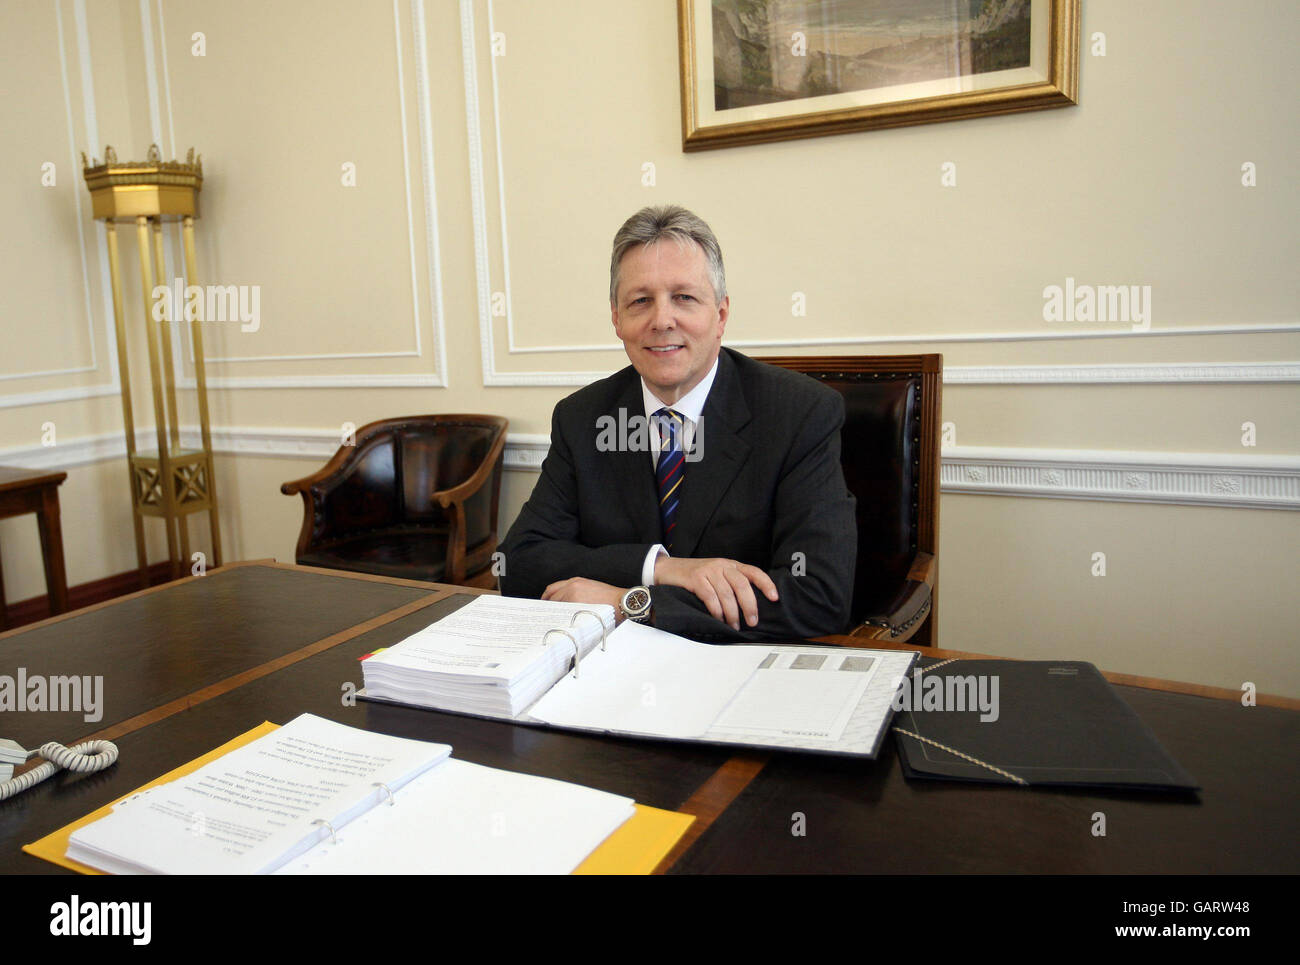 Northern Ireland's new First Minister Peter Robinson behind his desk after being nominated as First Minister in the Parliament Buildings, Stormont, Northern Ireland. Stock Photo